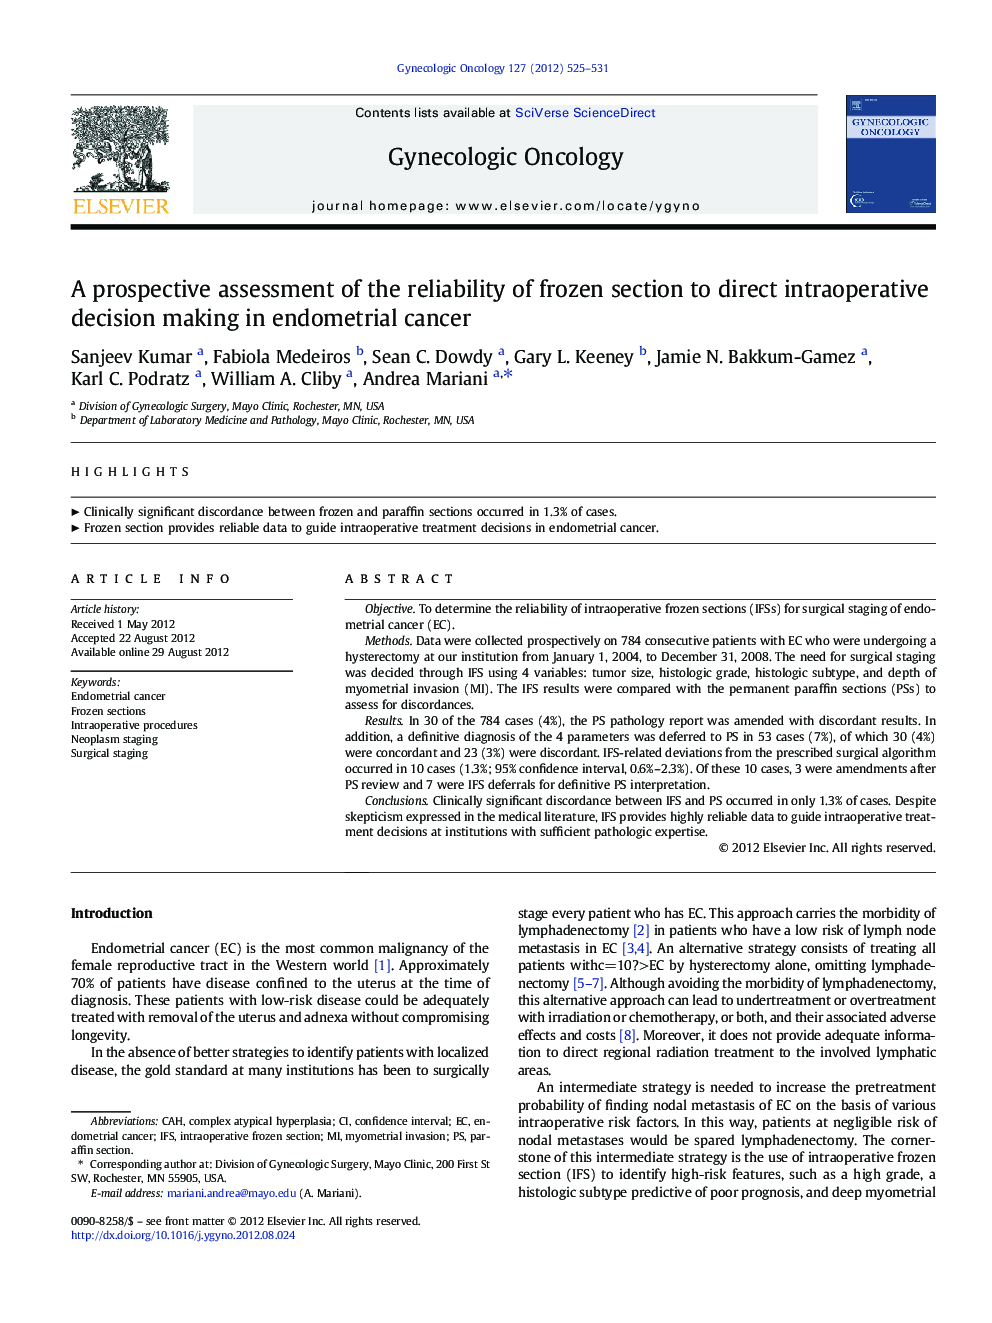 A prospective assessment of the reliability of frozen section to direct intraoperative decision making in endometrial cancer